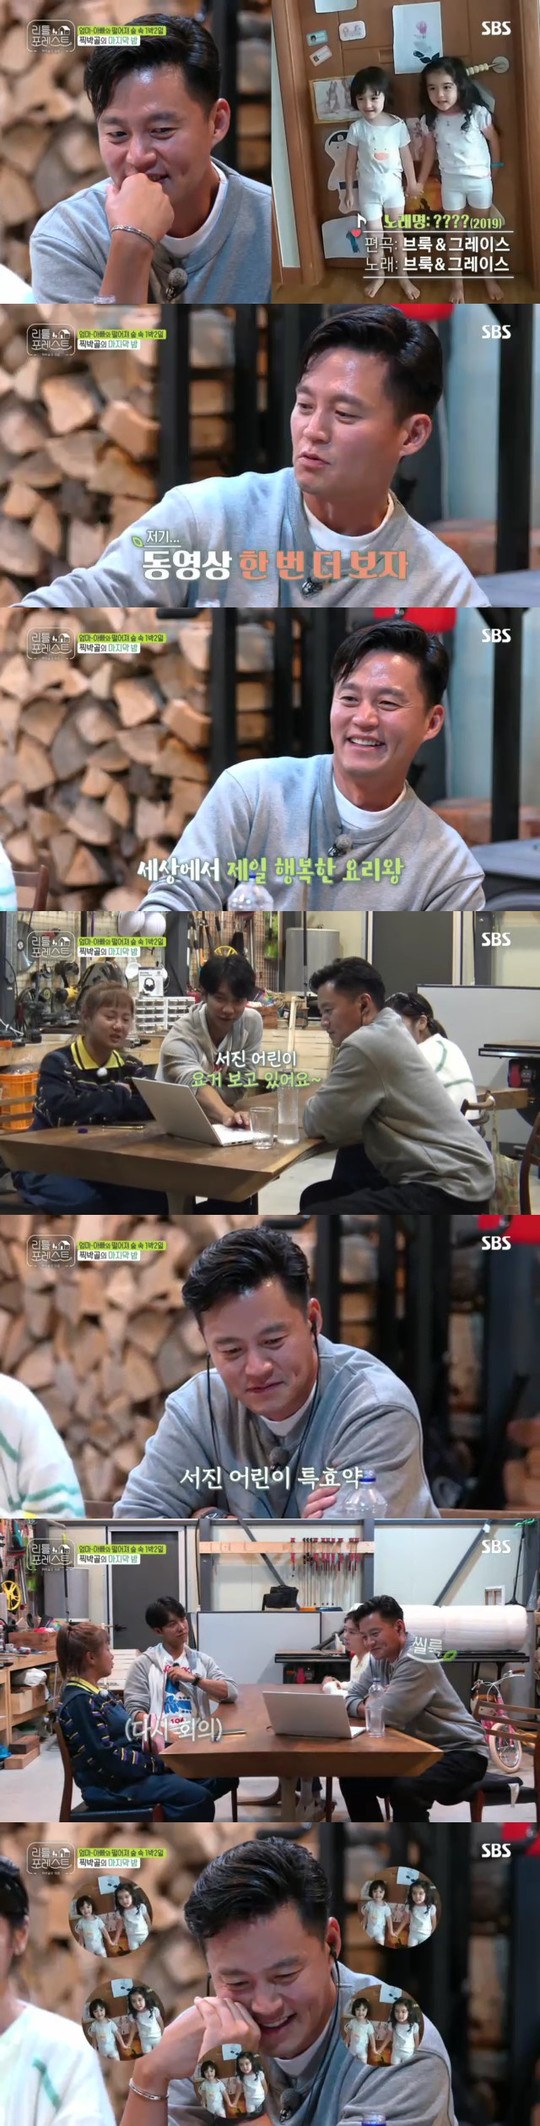 Iron Chef America The Uncle Lee Seo-jin, who was in love with the children, became the best one minute.On October 1, SBS Little Forest, Lee Seo-jin, Lee Seung-gi, Park Na-rae and Jung So-min were preparing to break up with Little.The members were prepared for the last filming with Little.Lee Seung-gi brought in an egg hatchet, and Park Na-rae prepared tools to make large soap bubbles.Lee Seo-jin was joined by twin sisters Brooke and Grace at Mart.Before departure, Lee Seo-jin expressed awkwardness in his time and Little, who first got it, saying, I am awkward when I am with my nephew.Lee Seo-jin then played songs for Brooke and Grace, who liked songs, but the children were embarrassed by Lee Seo-jin, saying they would sing each other.It was not easy to take two children to the market.Brooke and Grace each took Cart one as soon as they arrived at Mart, and Lee Seo-jin was forced to drag two Carts around and shop.Brooke and Grace were also tit-for-tat over Ice cream; eventually Lee Seo-jin even bought an extra Ice cream to soothe the crying Brooke.Littles watched the chick hatch together. Lee Seung-gi said, I didnt think eggs would be life. I wanted to show them that they were chickens.I was also surprised, he said, explaining why he came with an hatchet.Little was amazed at the scene of the first time, and Grace, in particular, could not leave the hatchet and watched the chicks with a curious expression.Park Na-rae, who came to the hatcher by Lee Hans hand, laughed at the fear of I saw it.Lee Seo-jin and Park Na-rae created potato pongsim and squid pollack wars for Littleies dinner.However, Little did not eat well because they ate cookies made by Lee Hyun Lee during the day.The Uncle, knowing her aunts heart, Brooke ate alone, and then went to the children directly and said, Lets eat the children.Brooke then approached Lee Seo-jin and said, I will feed you now.After that, Brooke was impressed by Park Na-rae, saying, Thank you for making my aunts delicious rice.Meanwhile, the members received a video from Brooke and Graces mother while writing a home correspondence for Little.In the video, Brooke and Grace are agitating, Seojin is The Uncle is Iron Chef America. Please eat and eat.I am so happy. The members showed jealousy of Lee Seo-jin when their name did not come out, and Lee Seo-jin laughed and could not hide his joy.emigration site